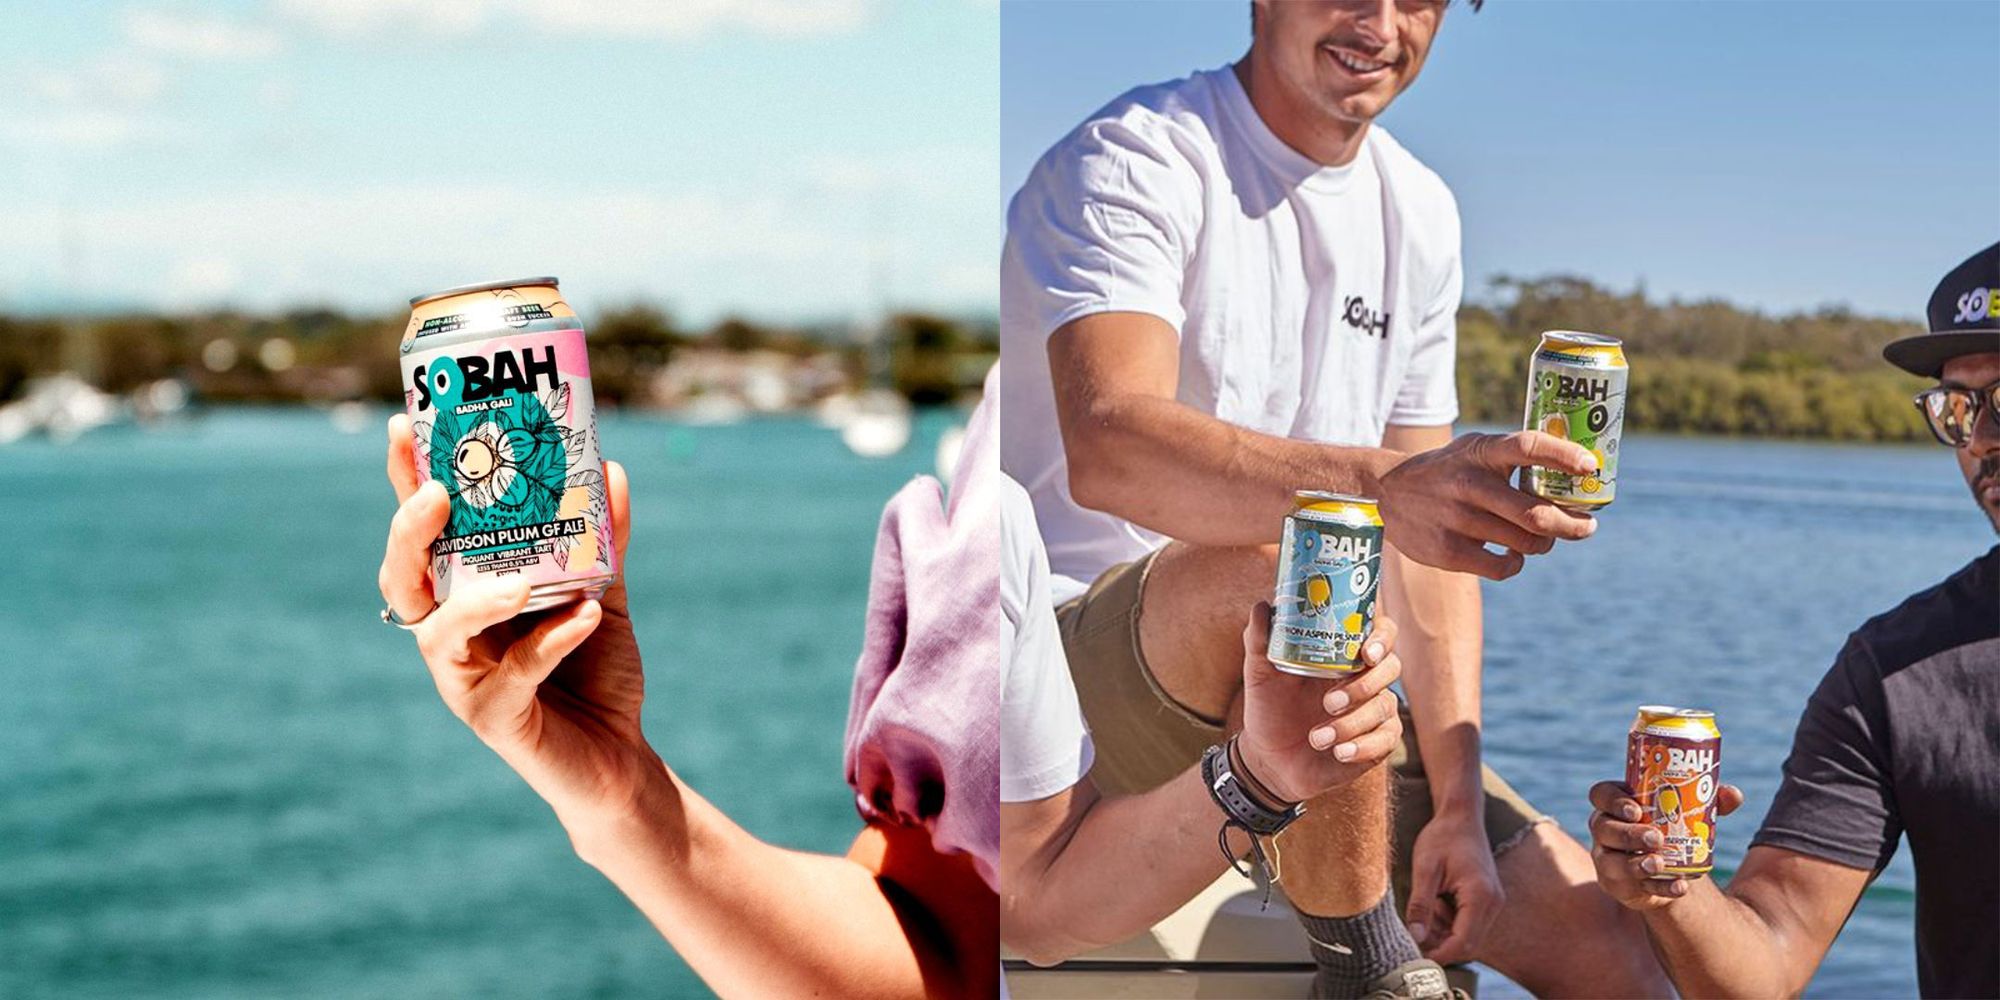 Left image is a person holding a can of Sobah, right image is three people holding a can each